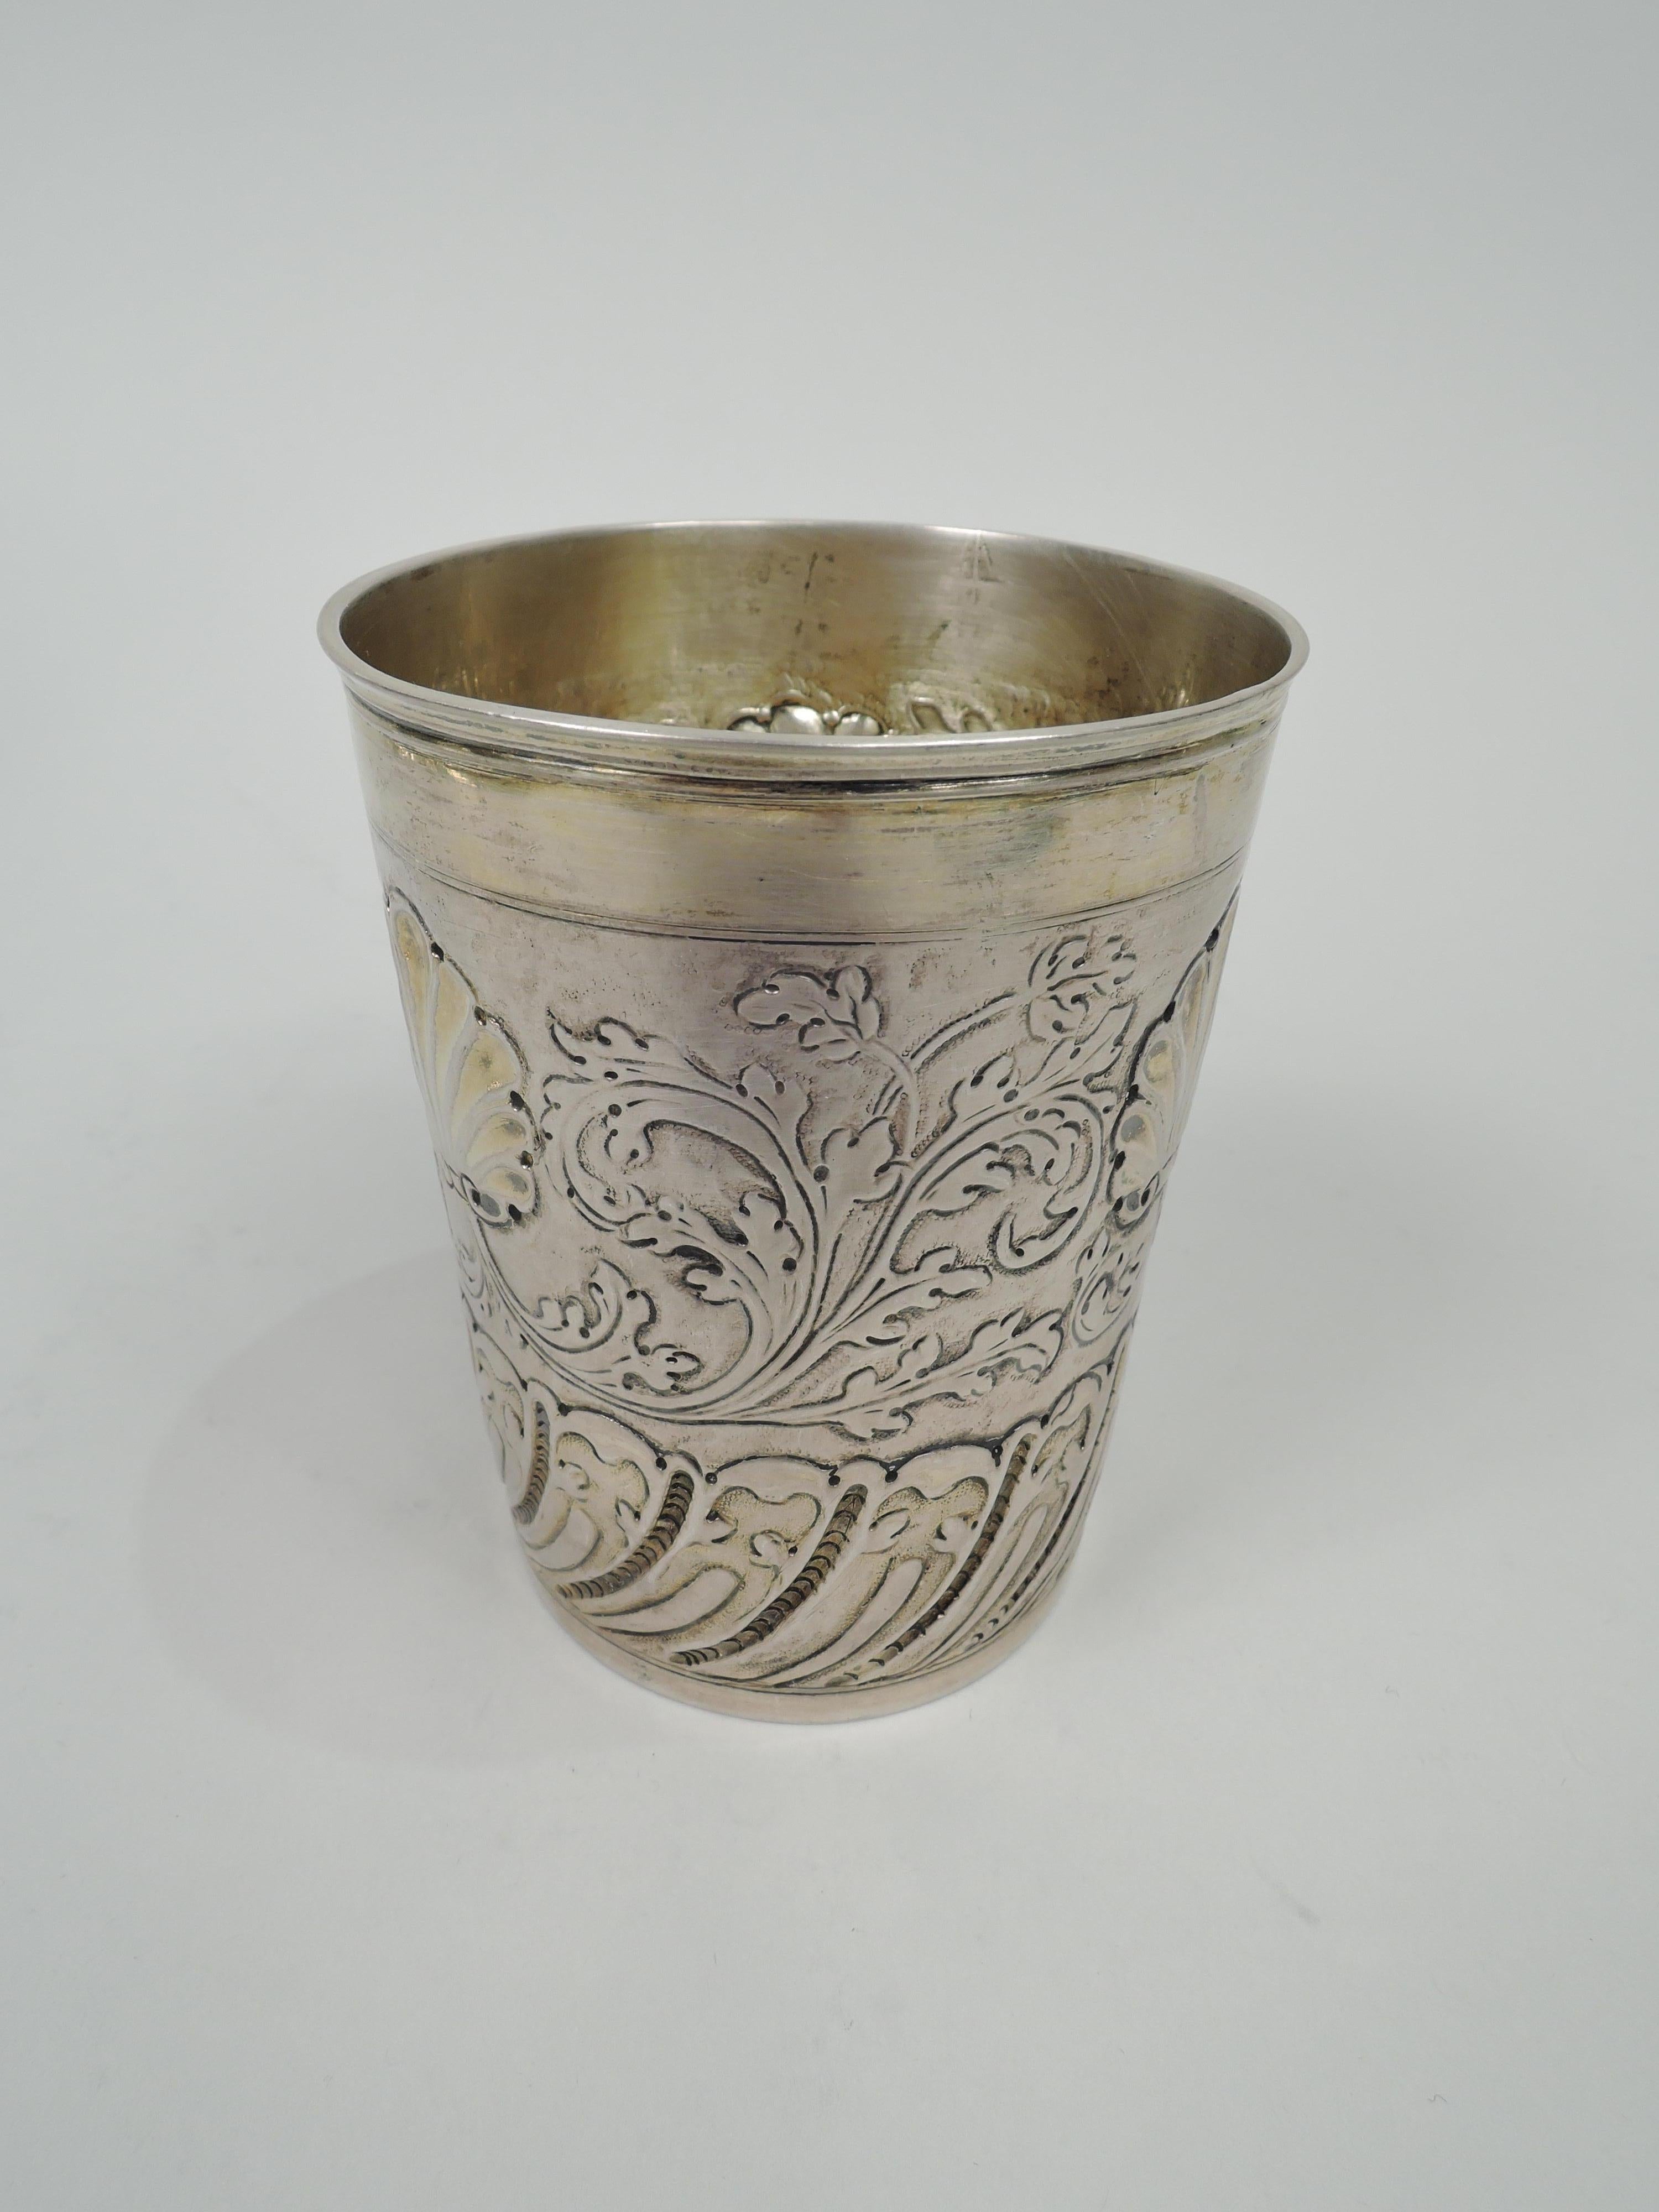 German Classical silver beaker cup, 18th century. At top leafing scrollwork and scallop shells; at bottom twisted leaf-and dart border. Ornament chased and heightened with engraving. Interior gilt washed. Maker’s mark comprising letters S and I.